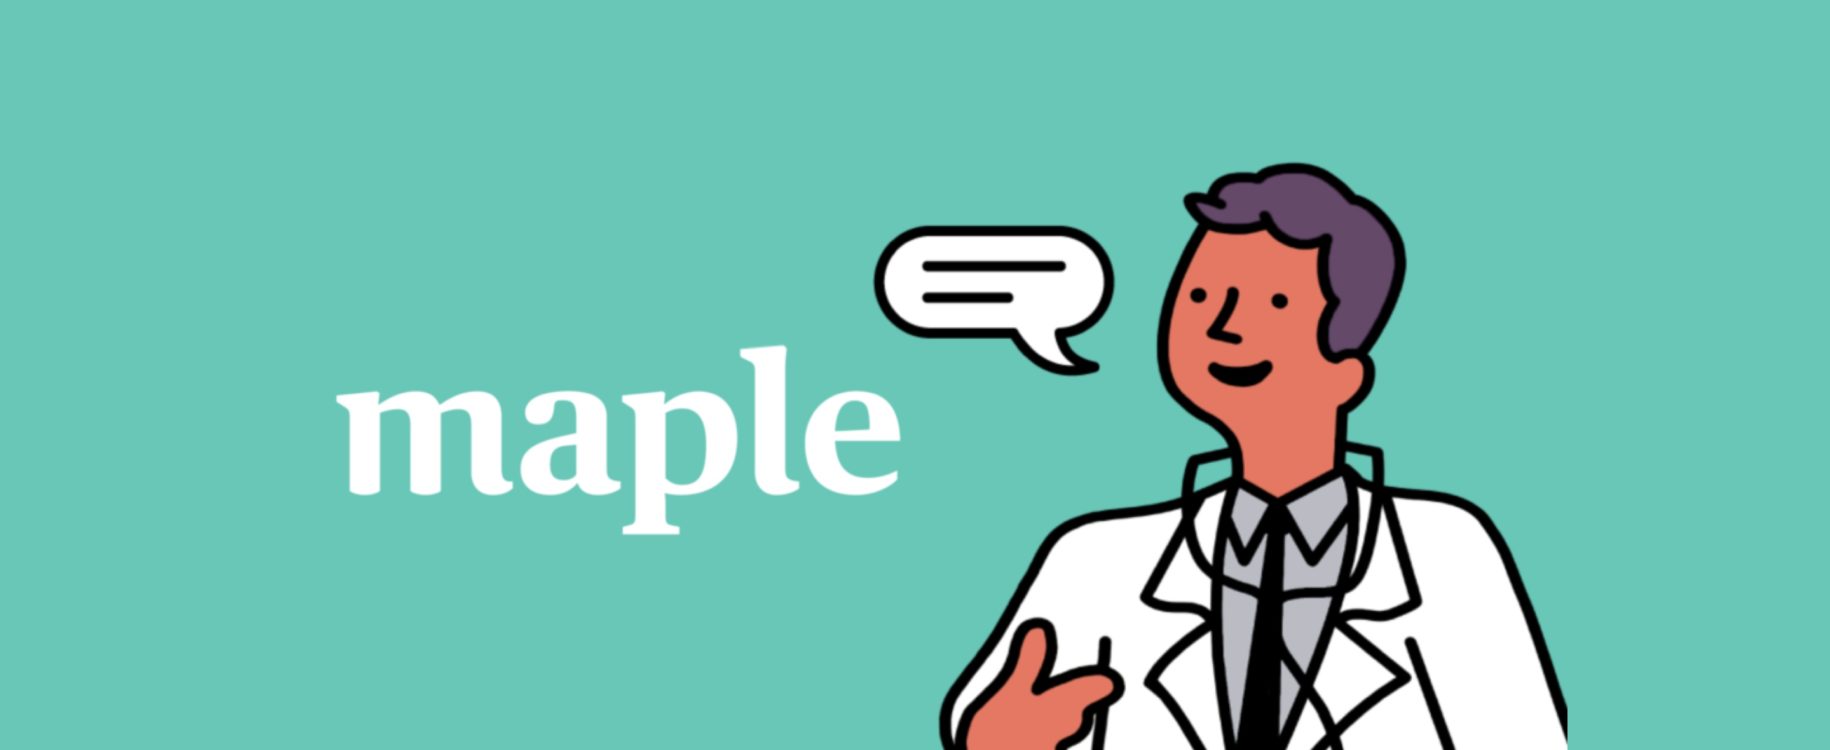 The Maple mobile app is here, and we think you’ll love it